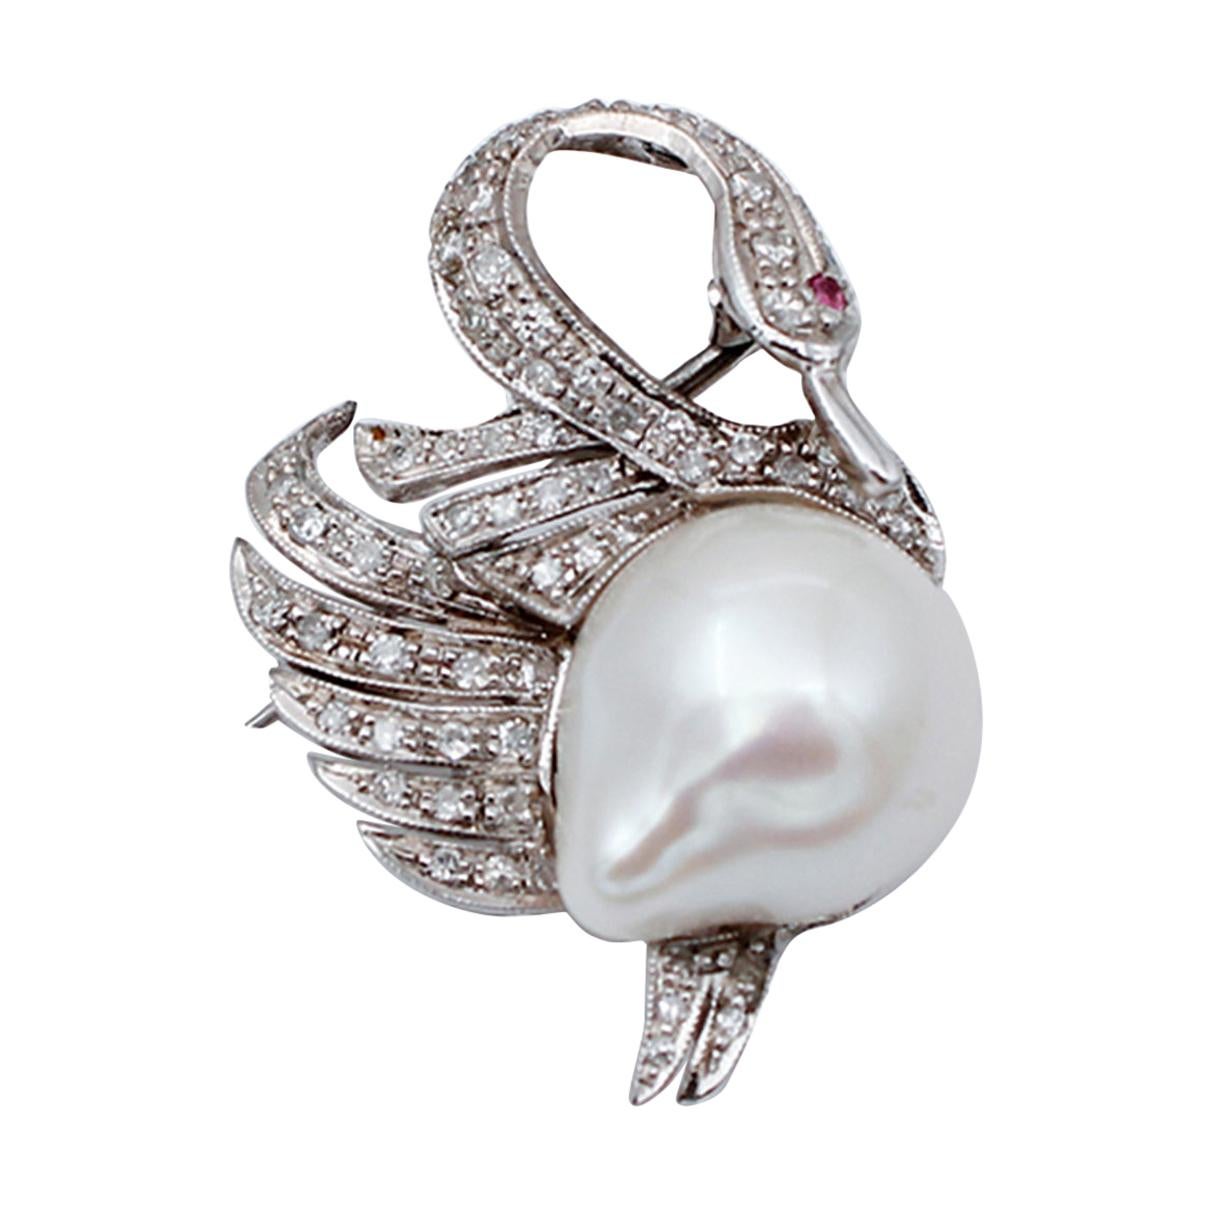 Ruby Diamonds Baroque Pearl, 14kt White Gold Swan Shaped Brooch/Pendant Necklace